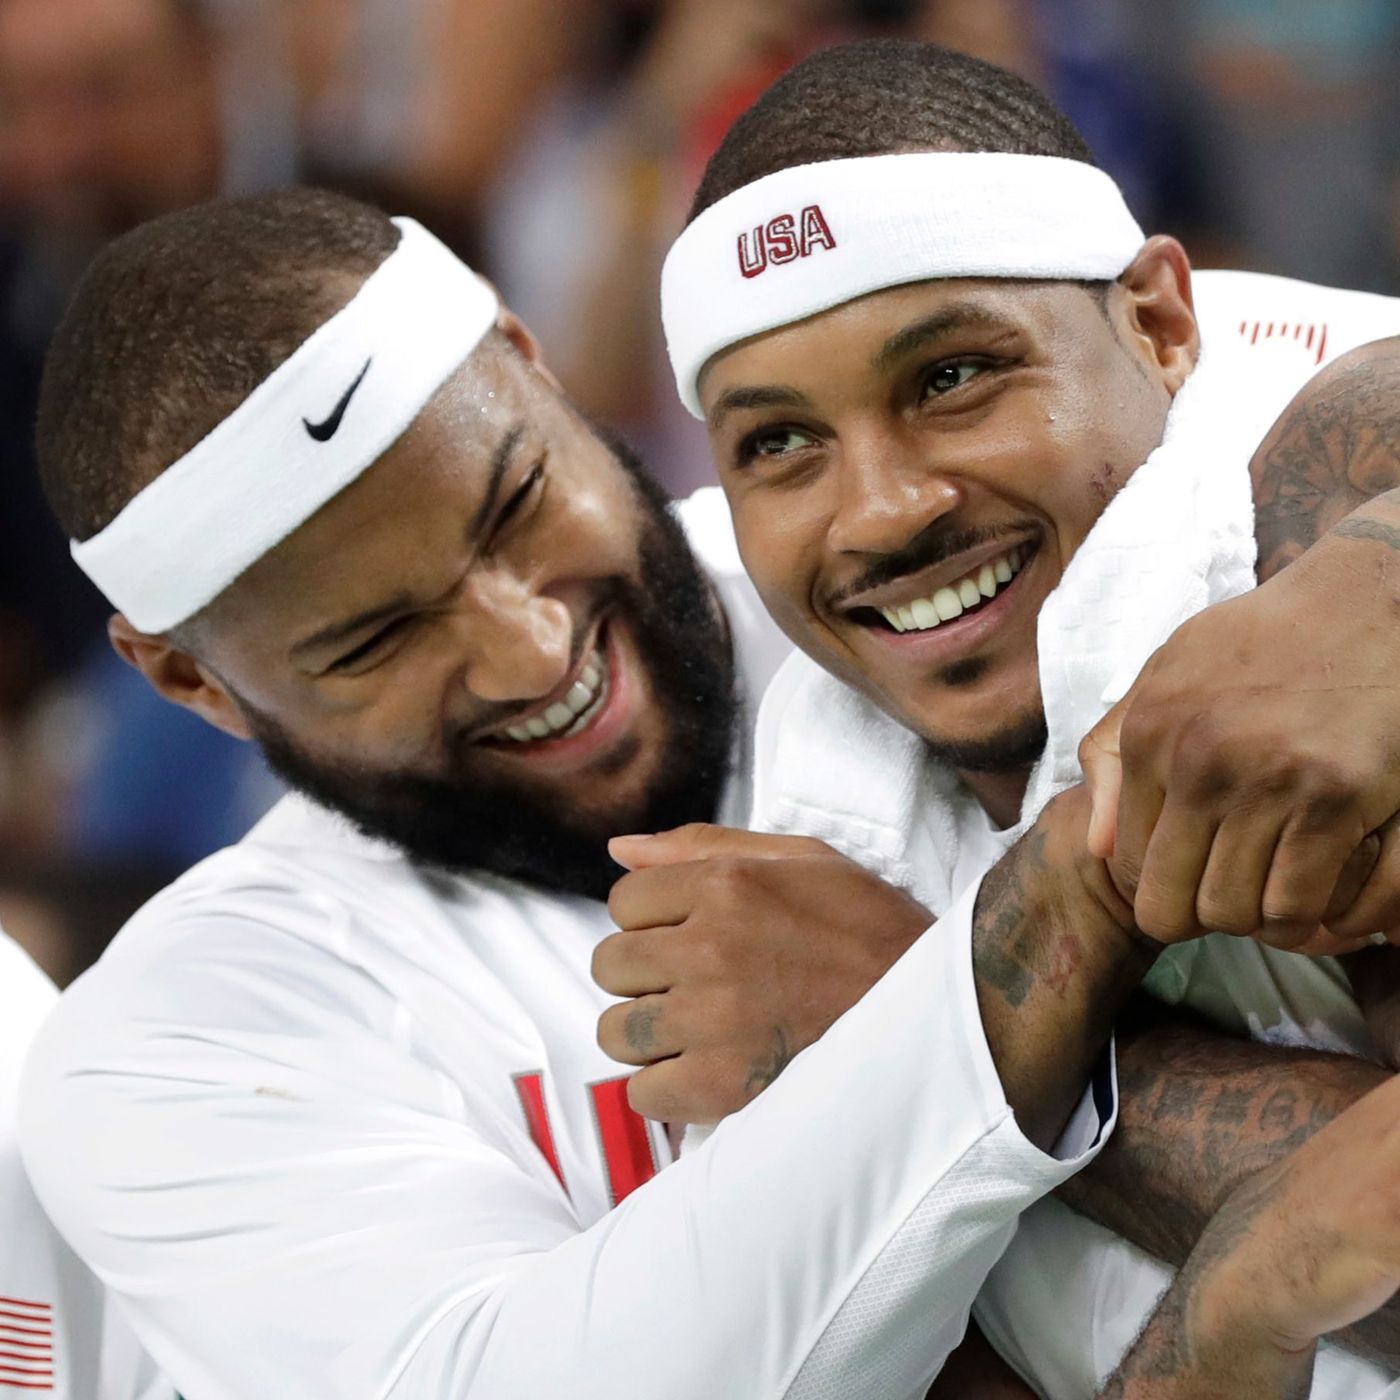 What's next for DeMarcus Cousins, Carmelo Anthony?